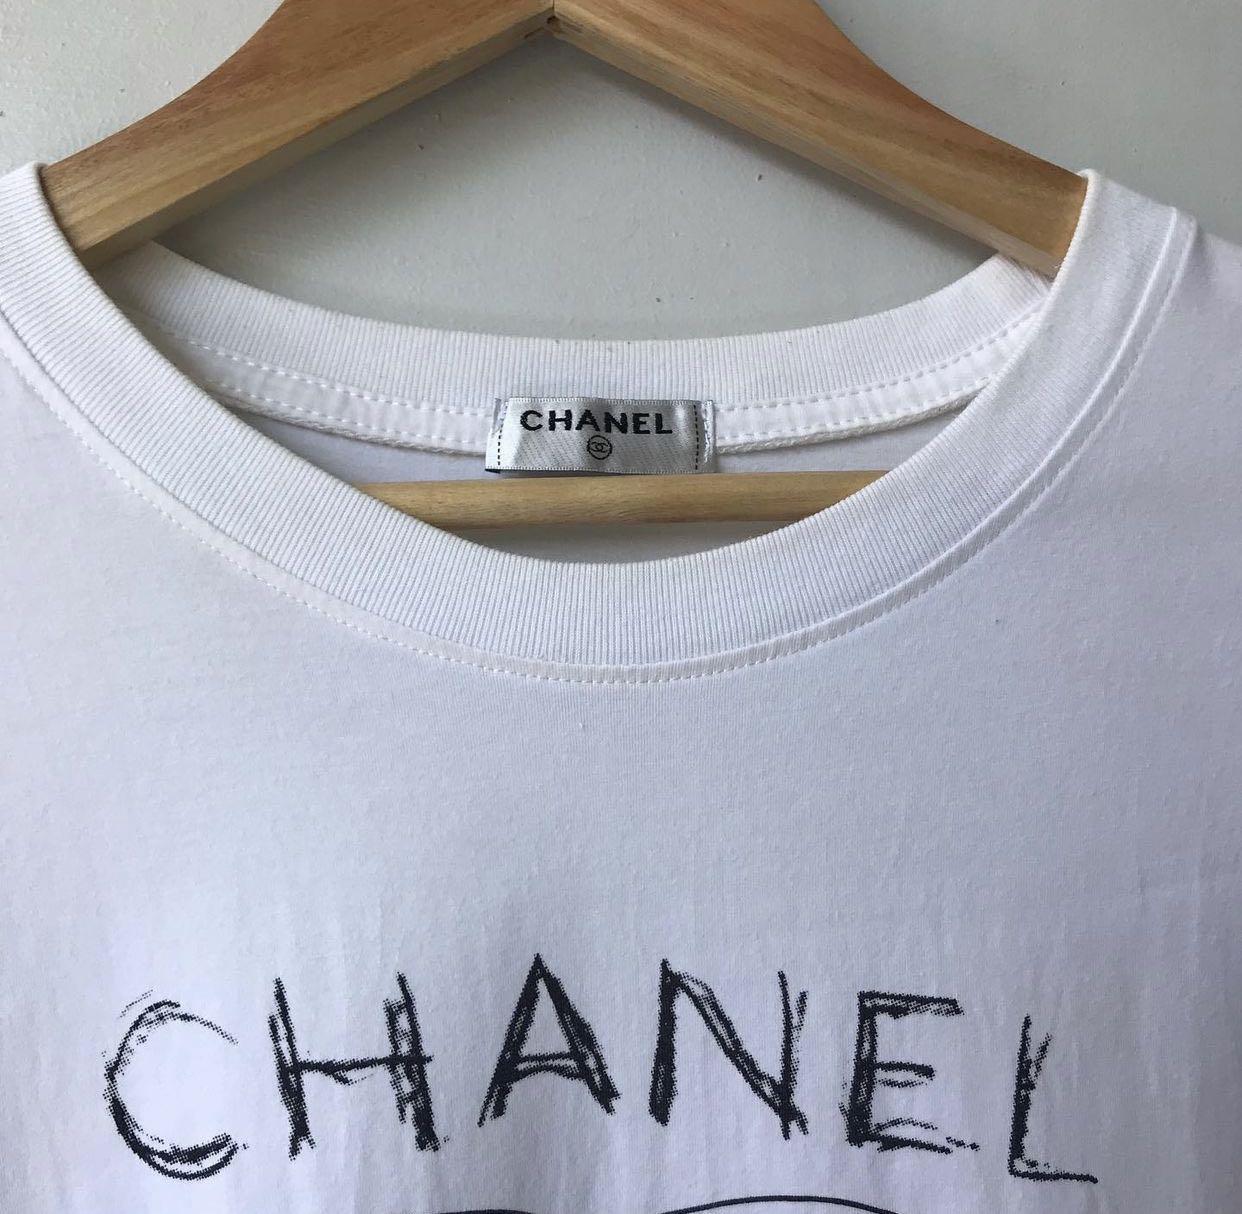 CHANEL COLETTE HEART TEE, Luxury, Apparel on Carousell